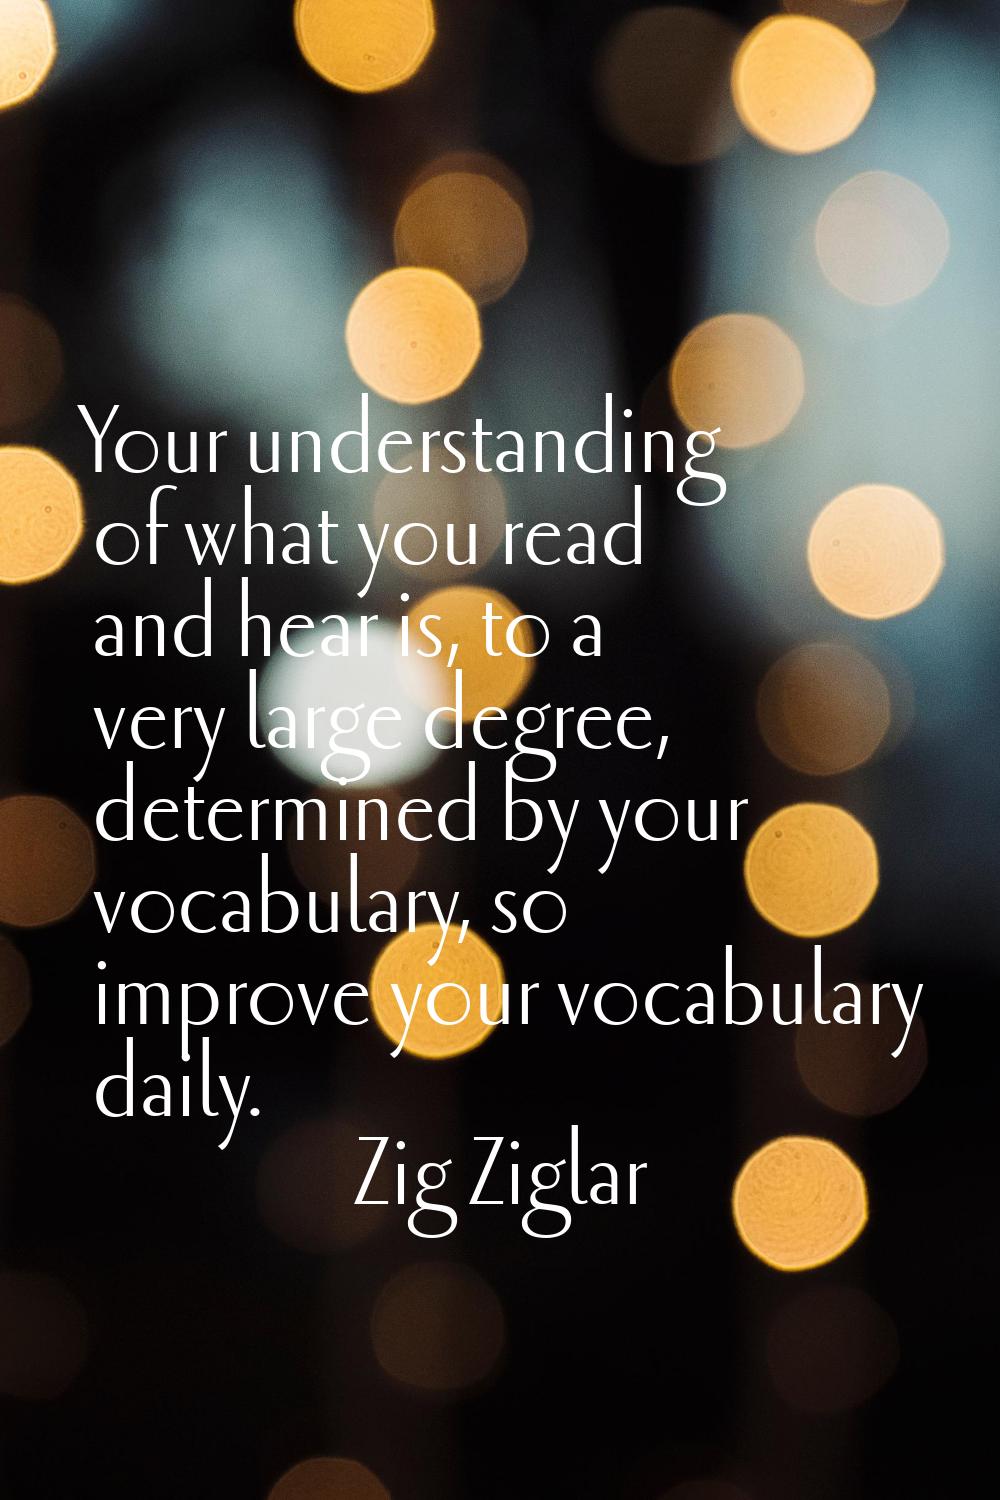 Your understanding of what you read and hear is, to a very large degree, determined by your vocabul